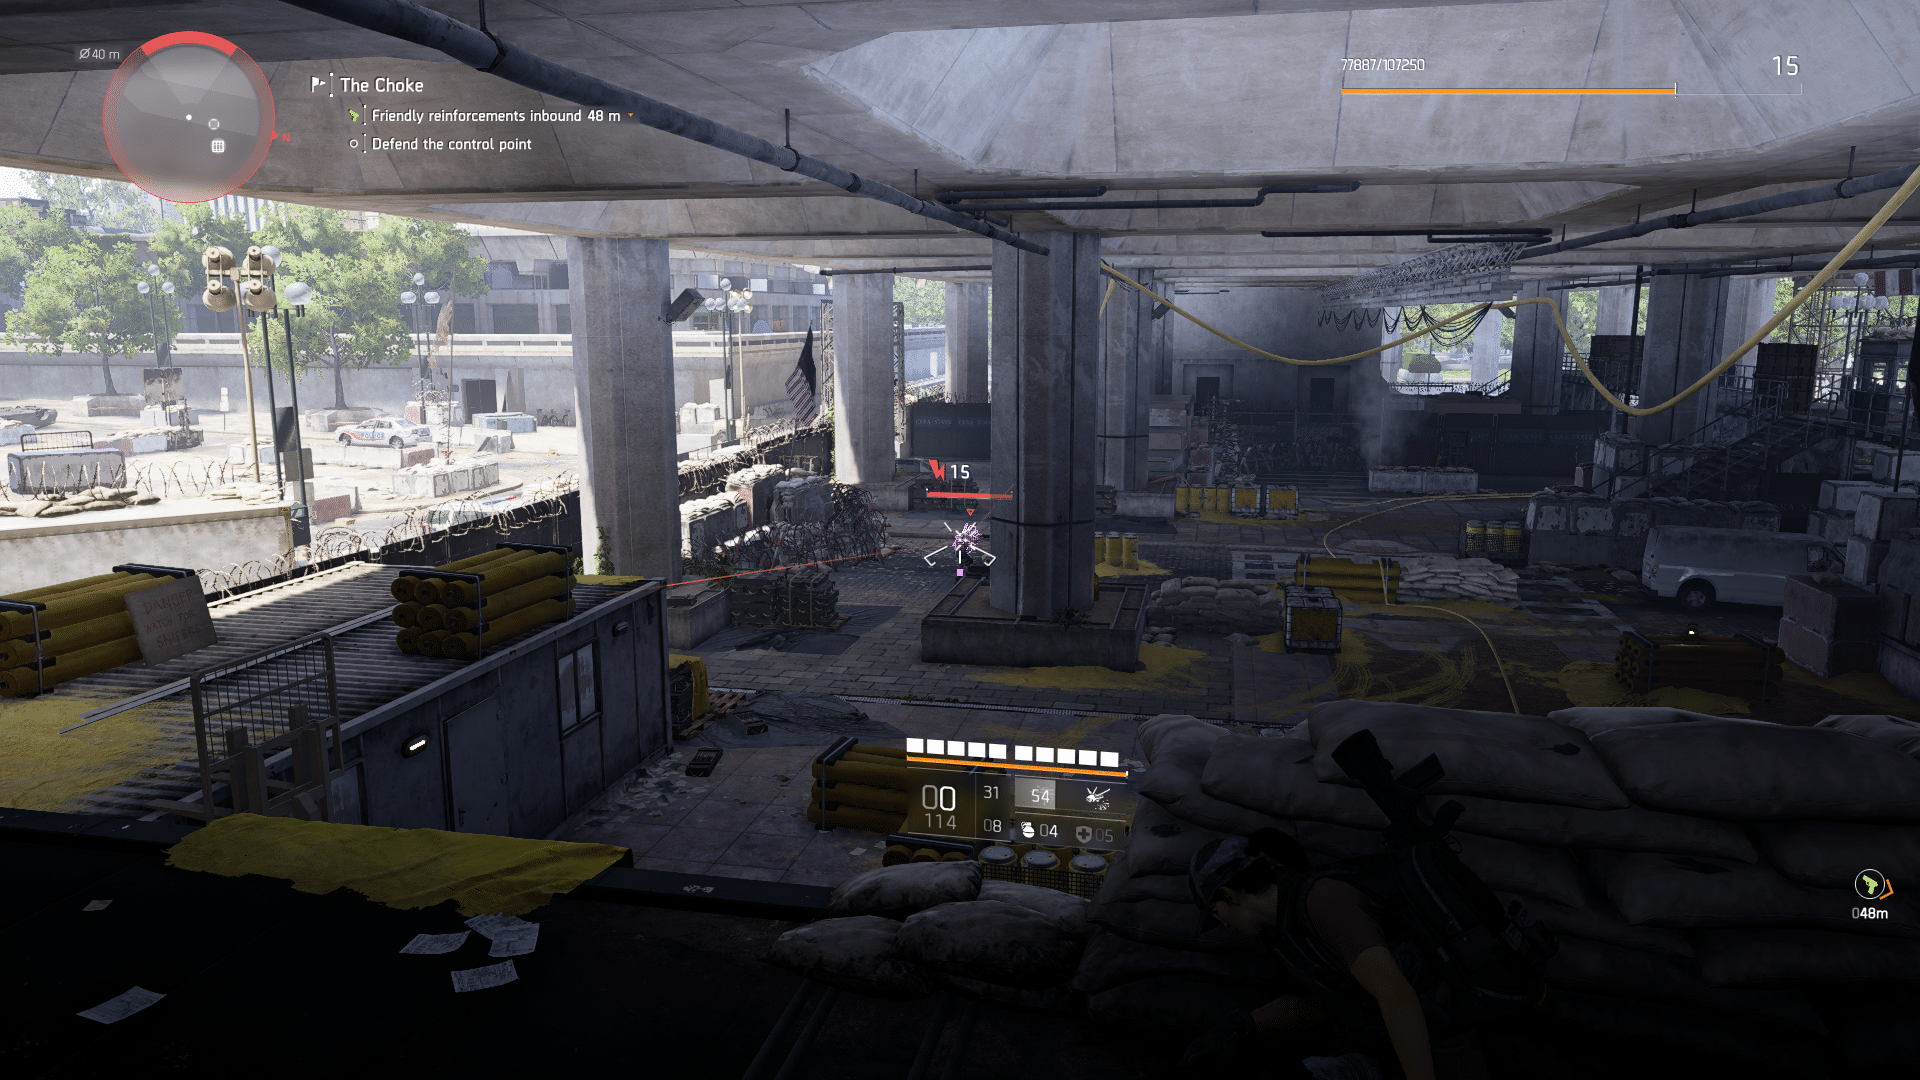 TheDivision2 4 7 2019 8 48 25 PM 442 1